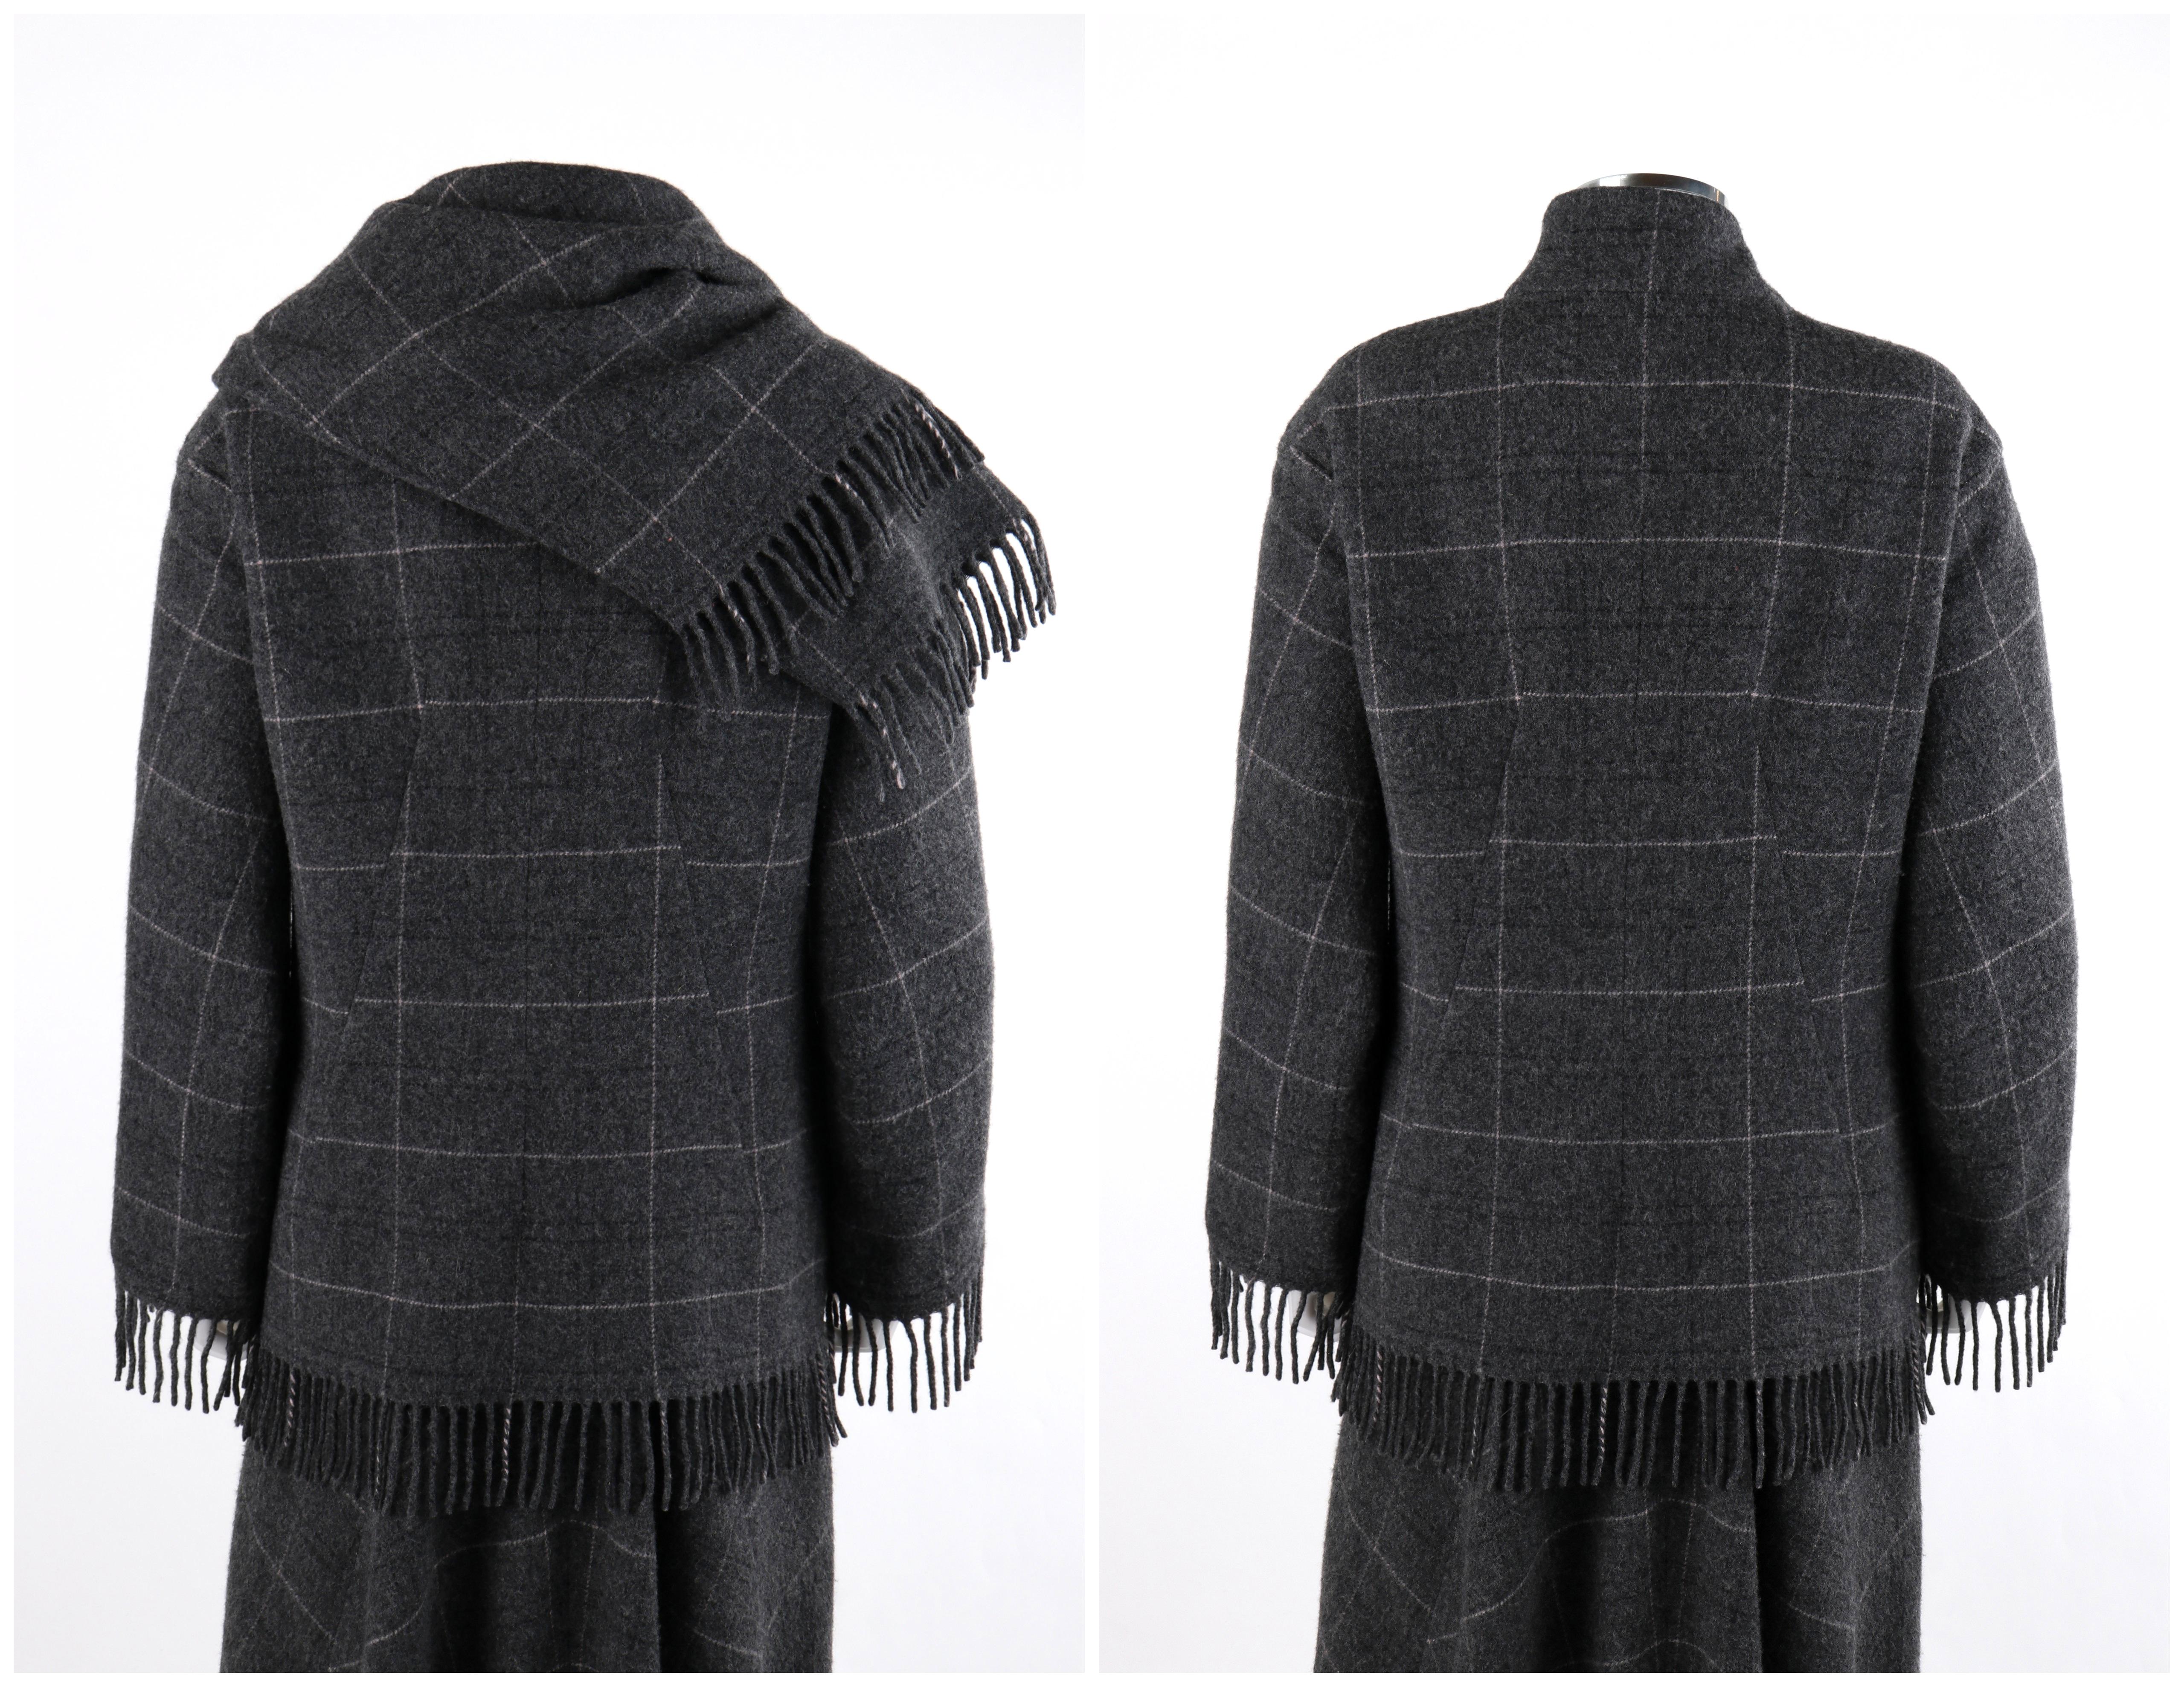 ALEXANDER McQUEEN A/W 1999 “The Overlook” Gray Check Fringe Jacket Skirt Set For Sale 2